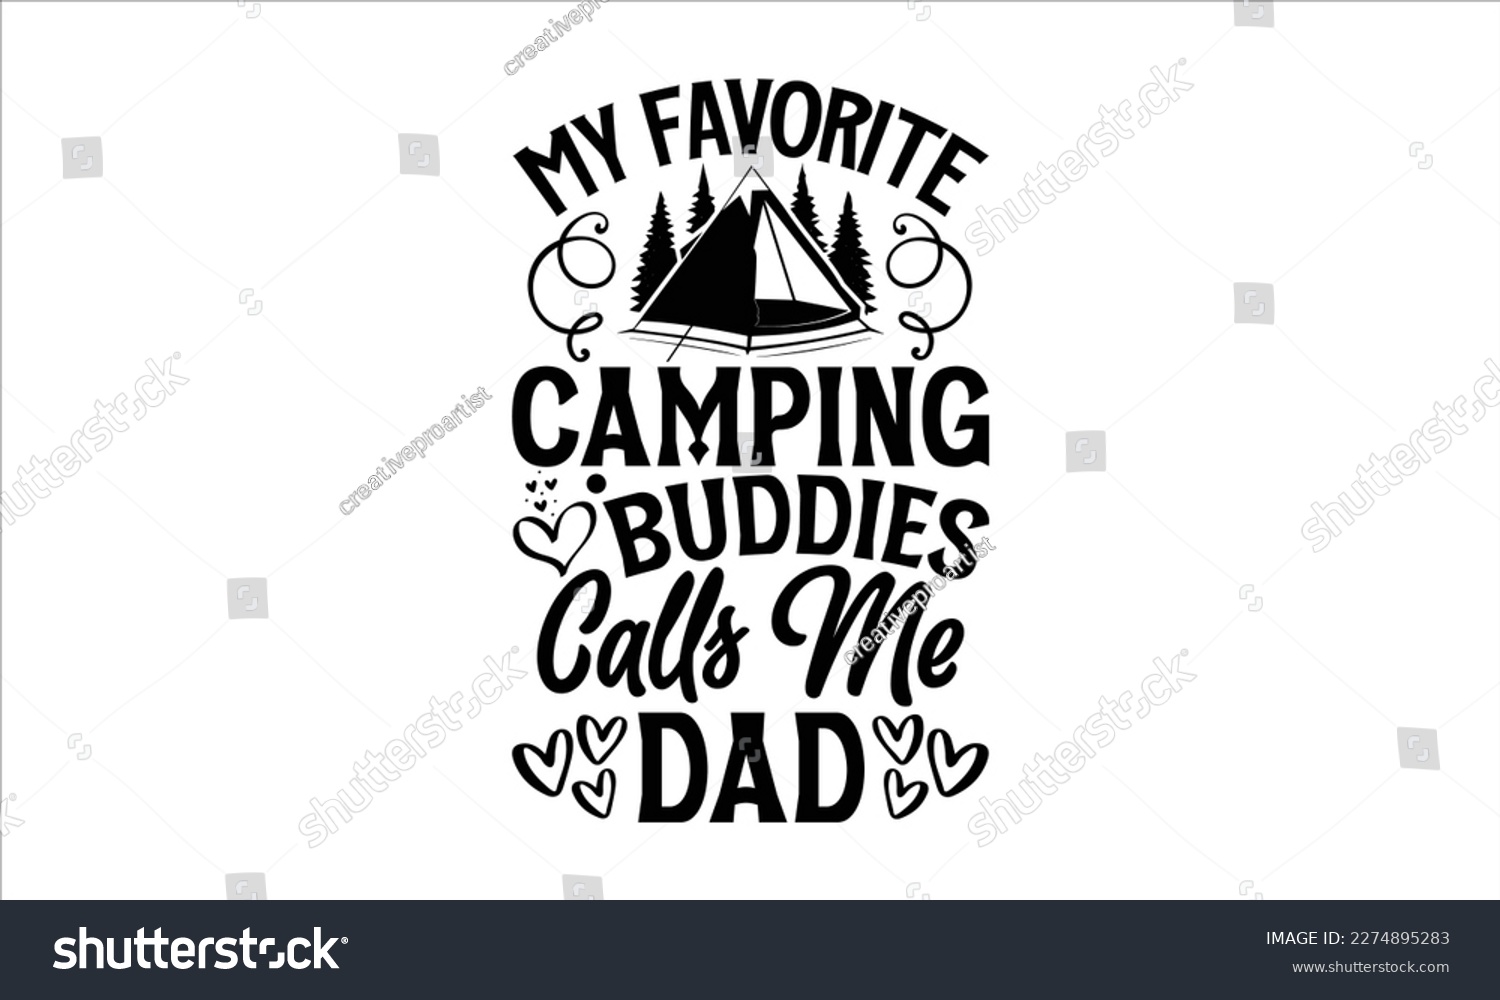 SVG of My favorite camping buddies Calls Me Dad- Father,s Day svg design, Handmade calligraphy vector illustration, typography t shirt for prints on bags, posters, cards Isolated on white background. EPS svg